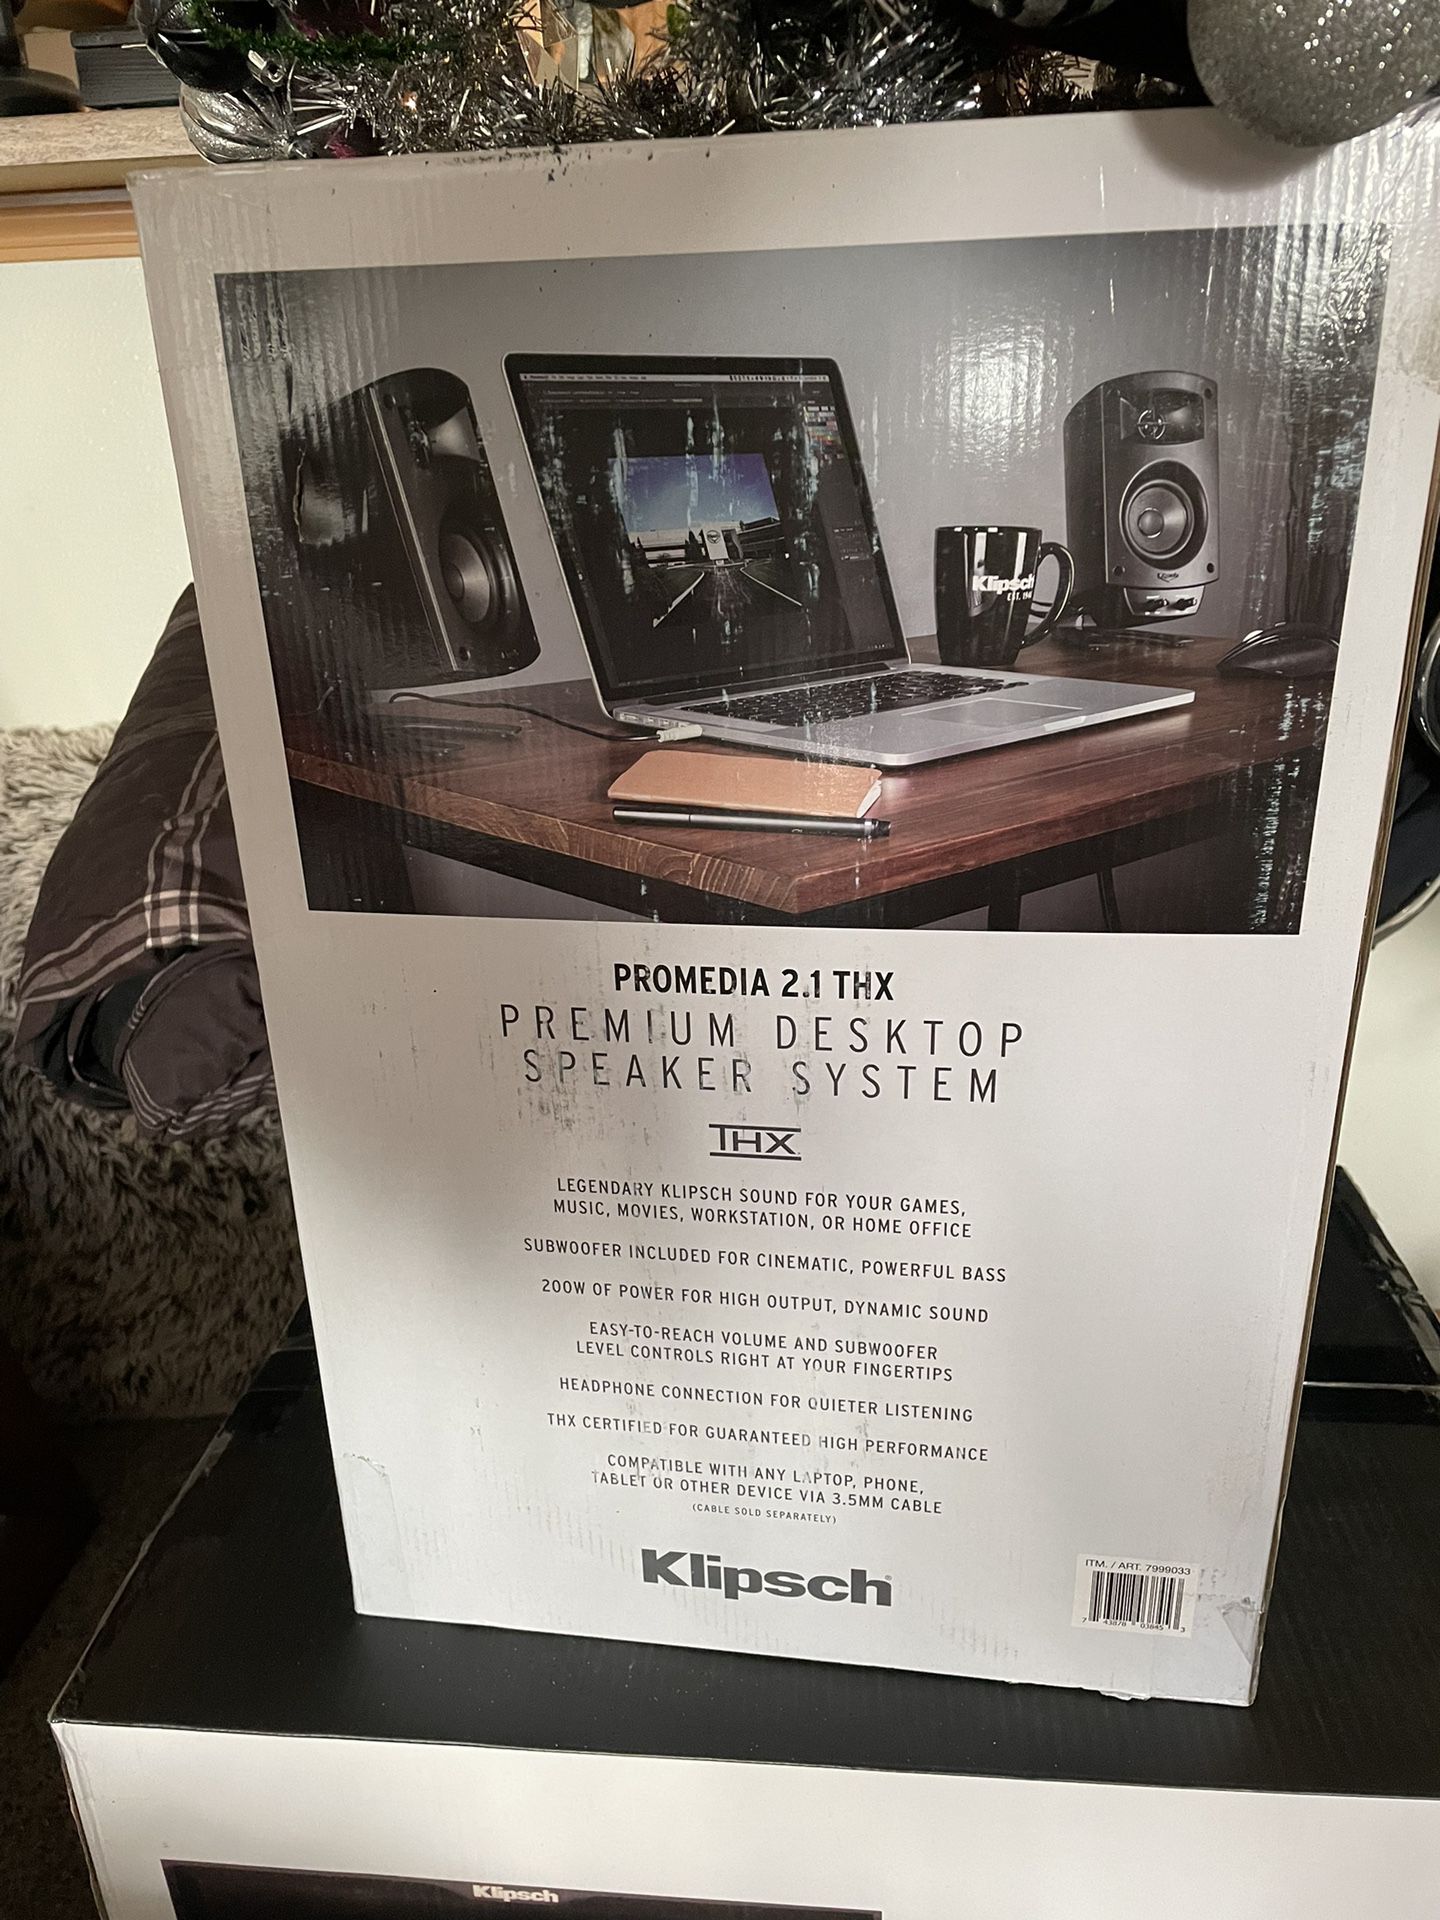 Klipsch Speakers and Subwoofer: Unused brand new